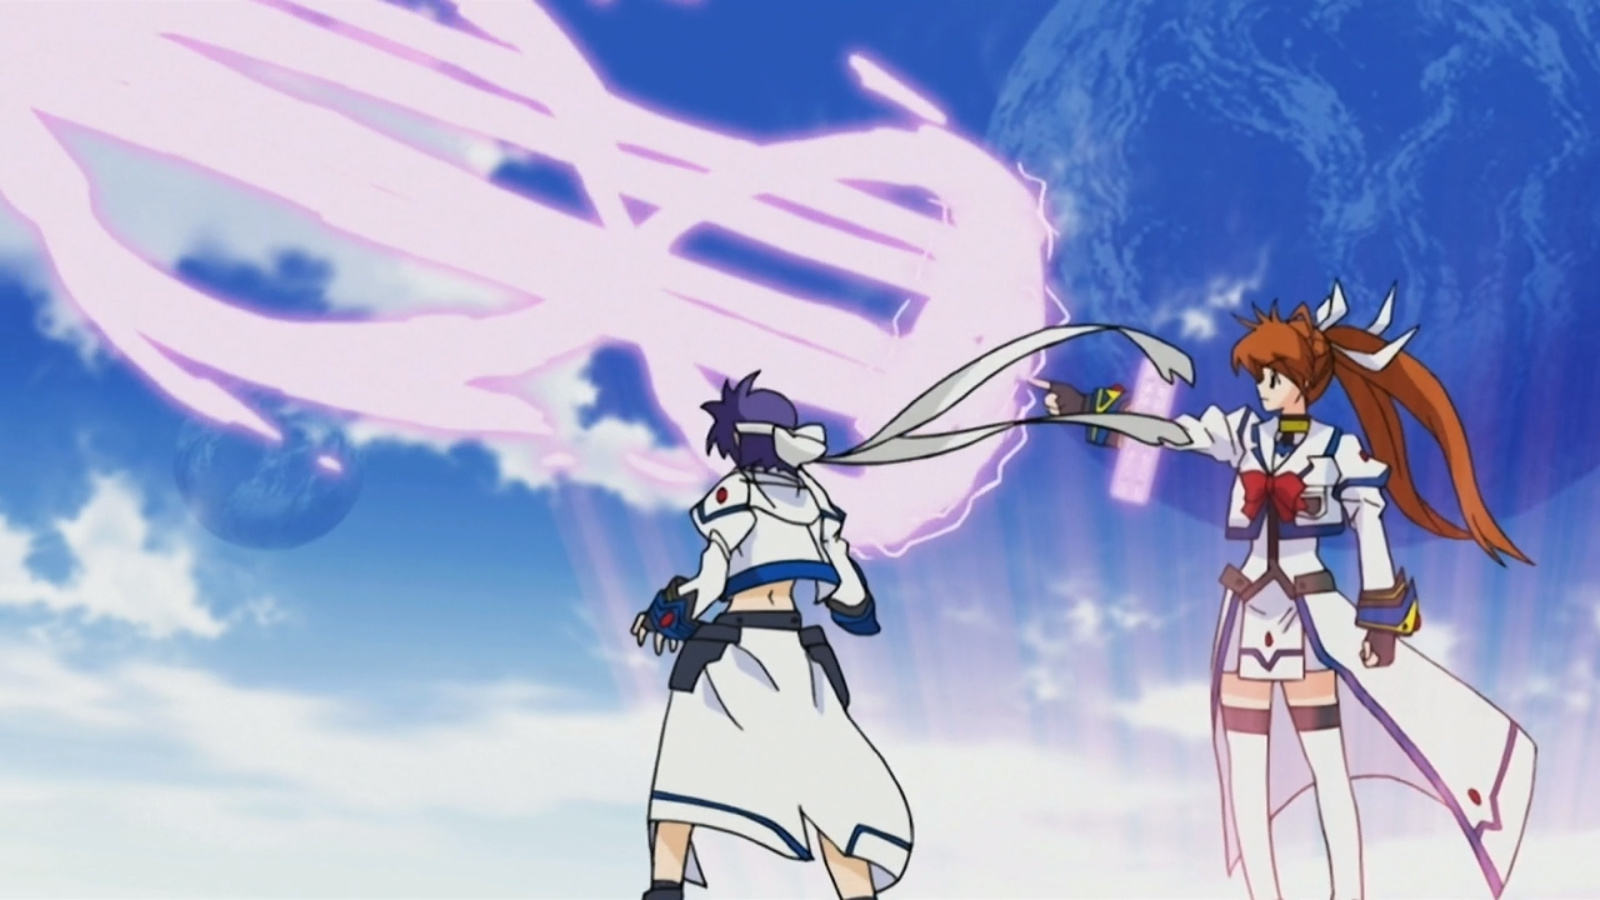 Anime Review: 'Made in Abyss' - deus ex magical girl